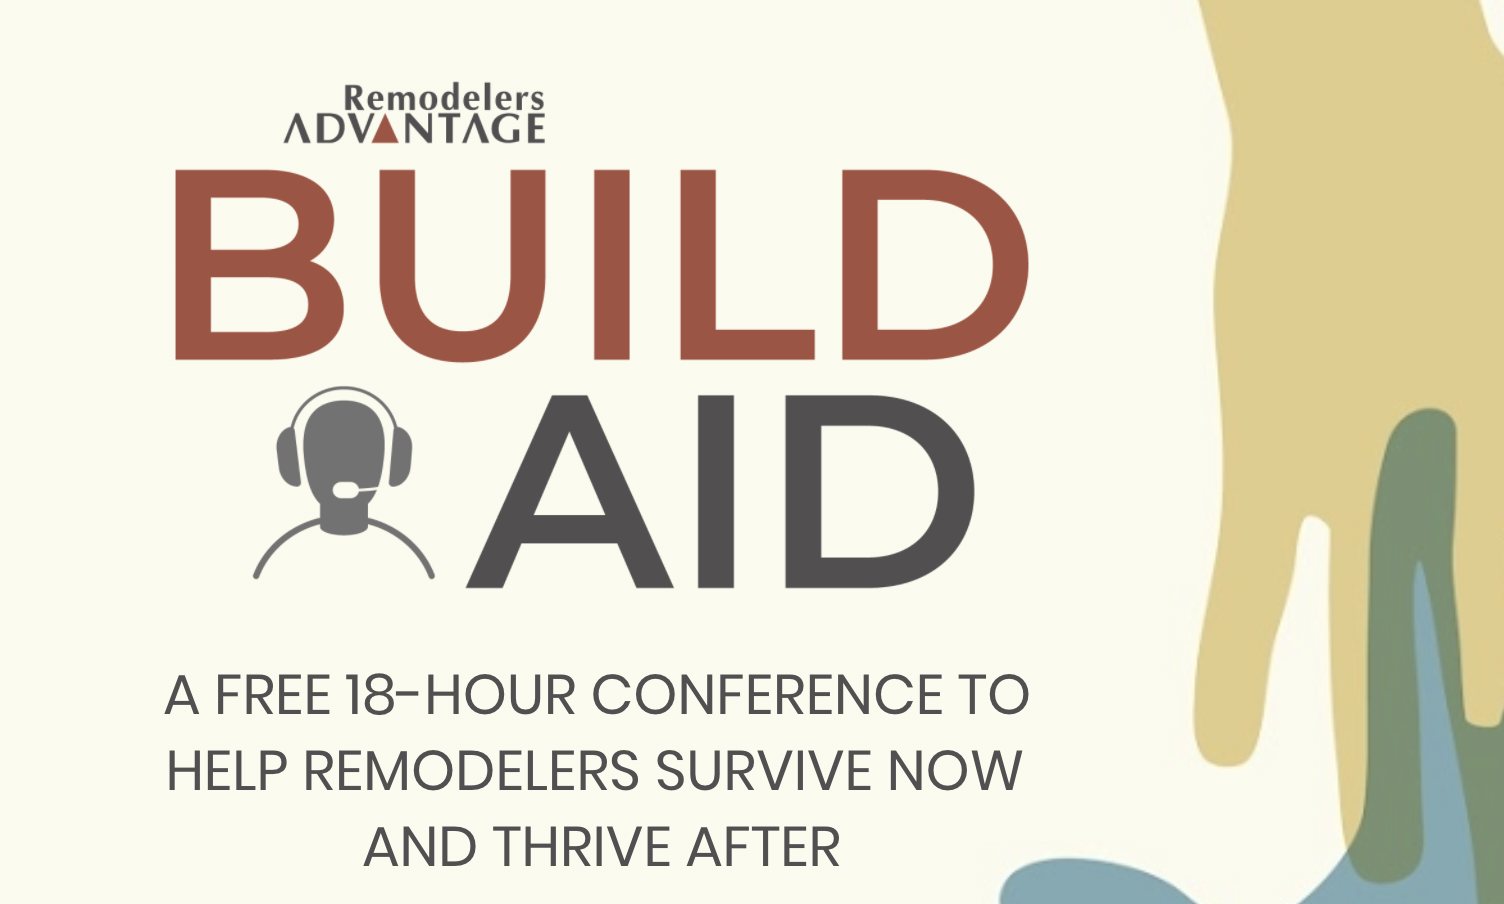 Build-aid gives resources for remodelers dealing with the coronavirus covid-19